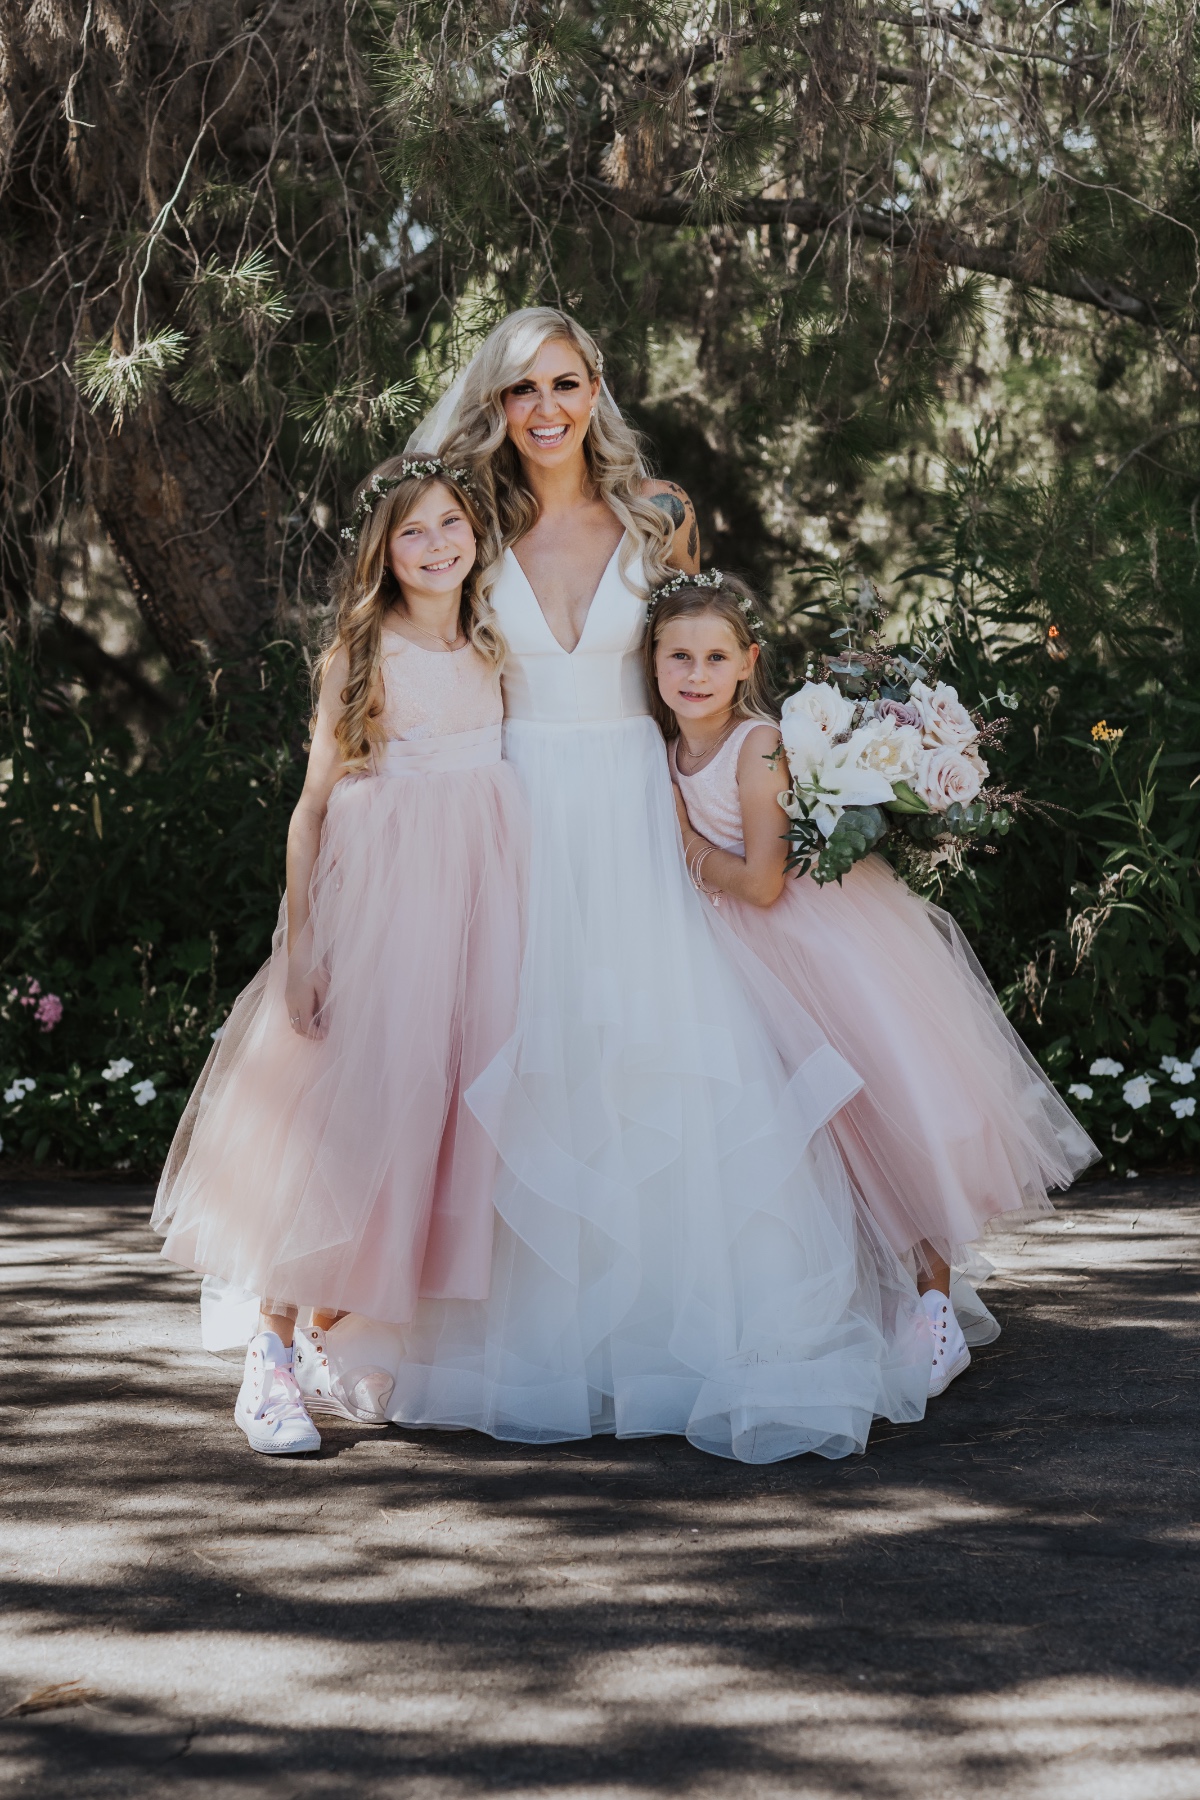 Flower girl outfit ideas